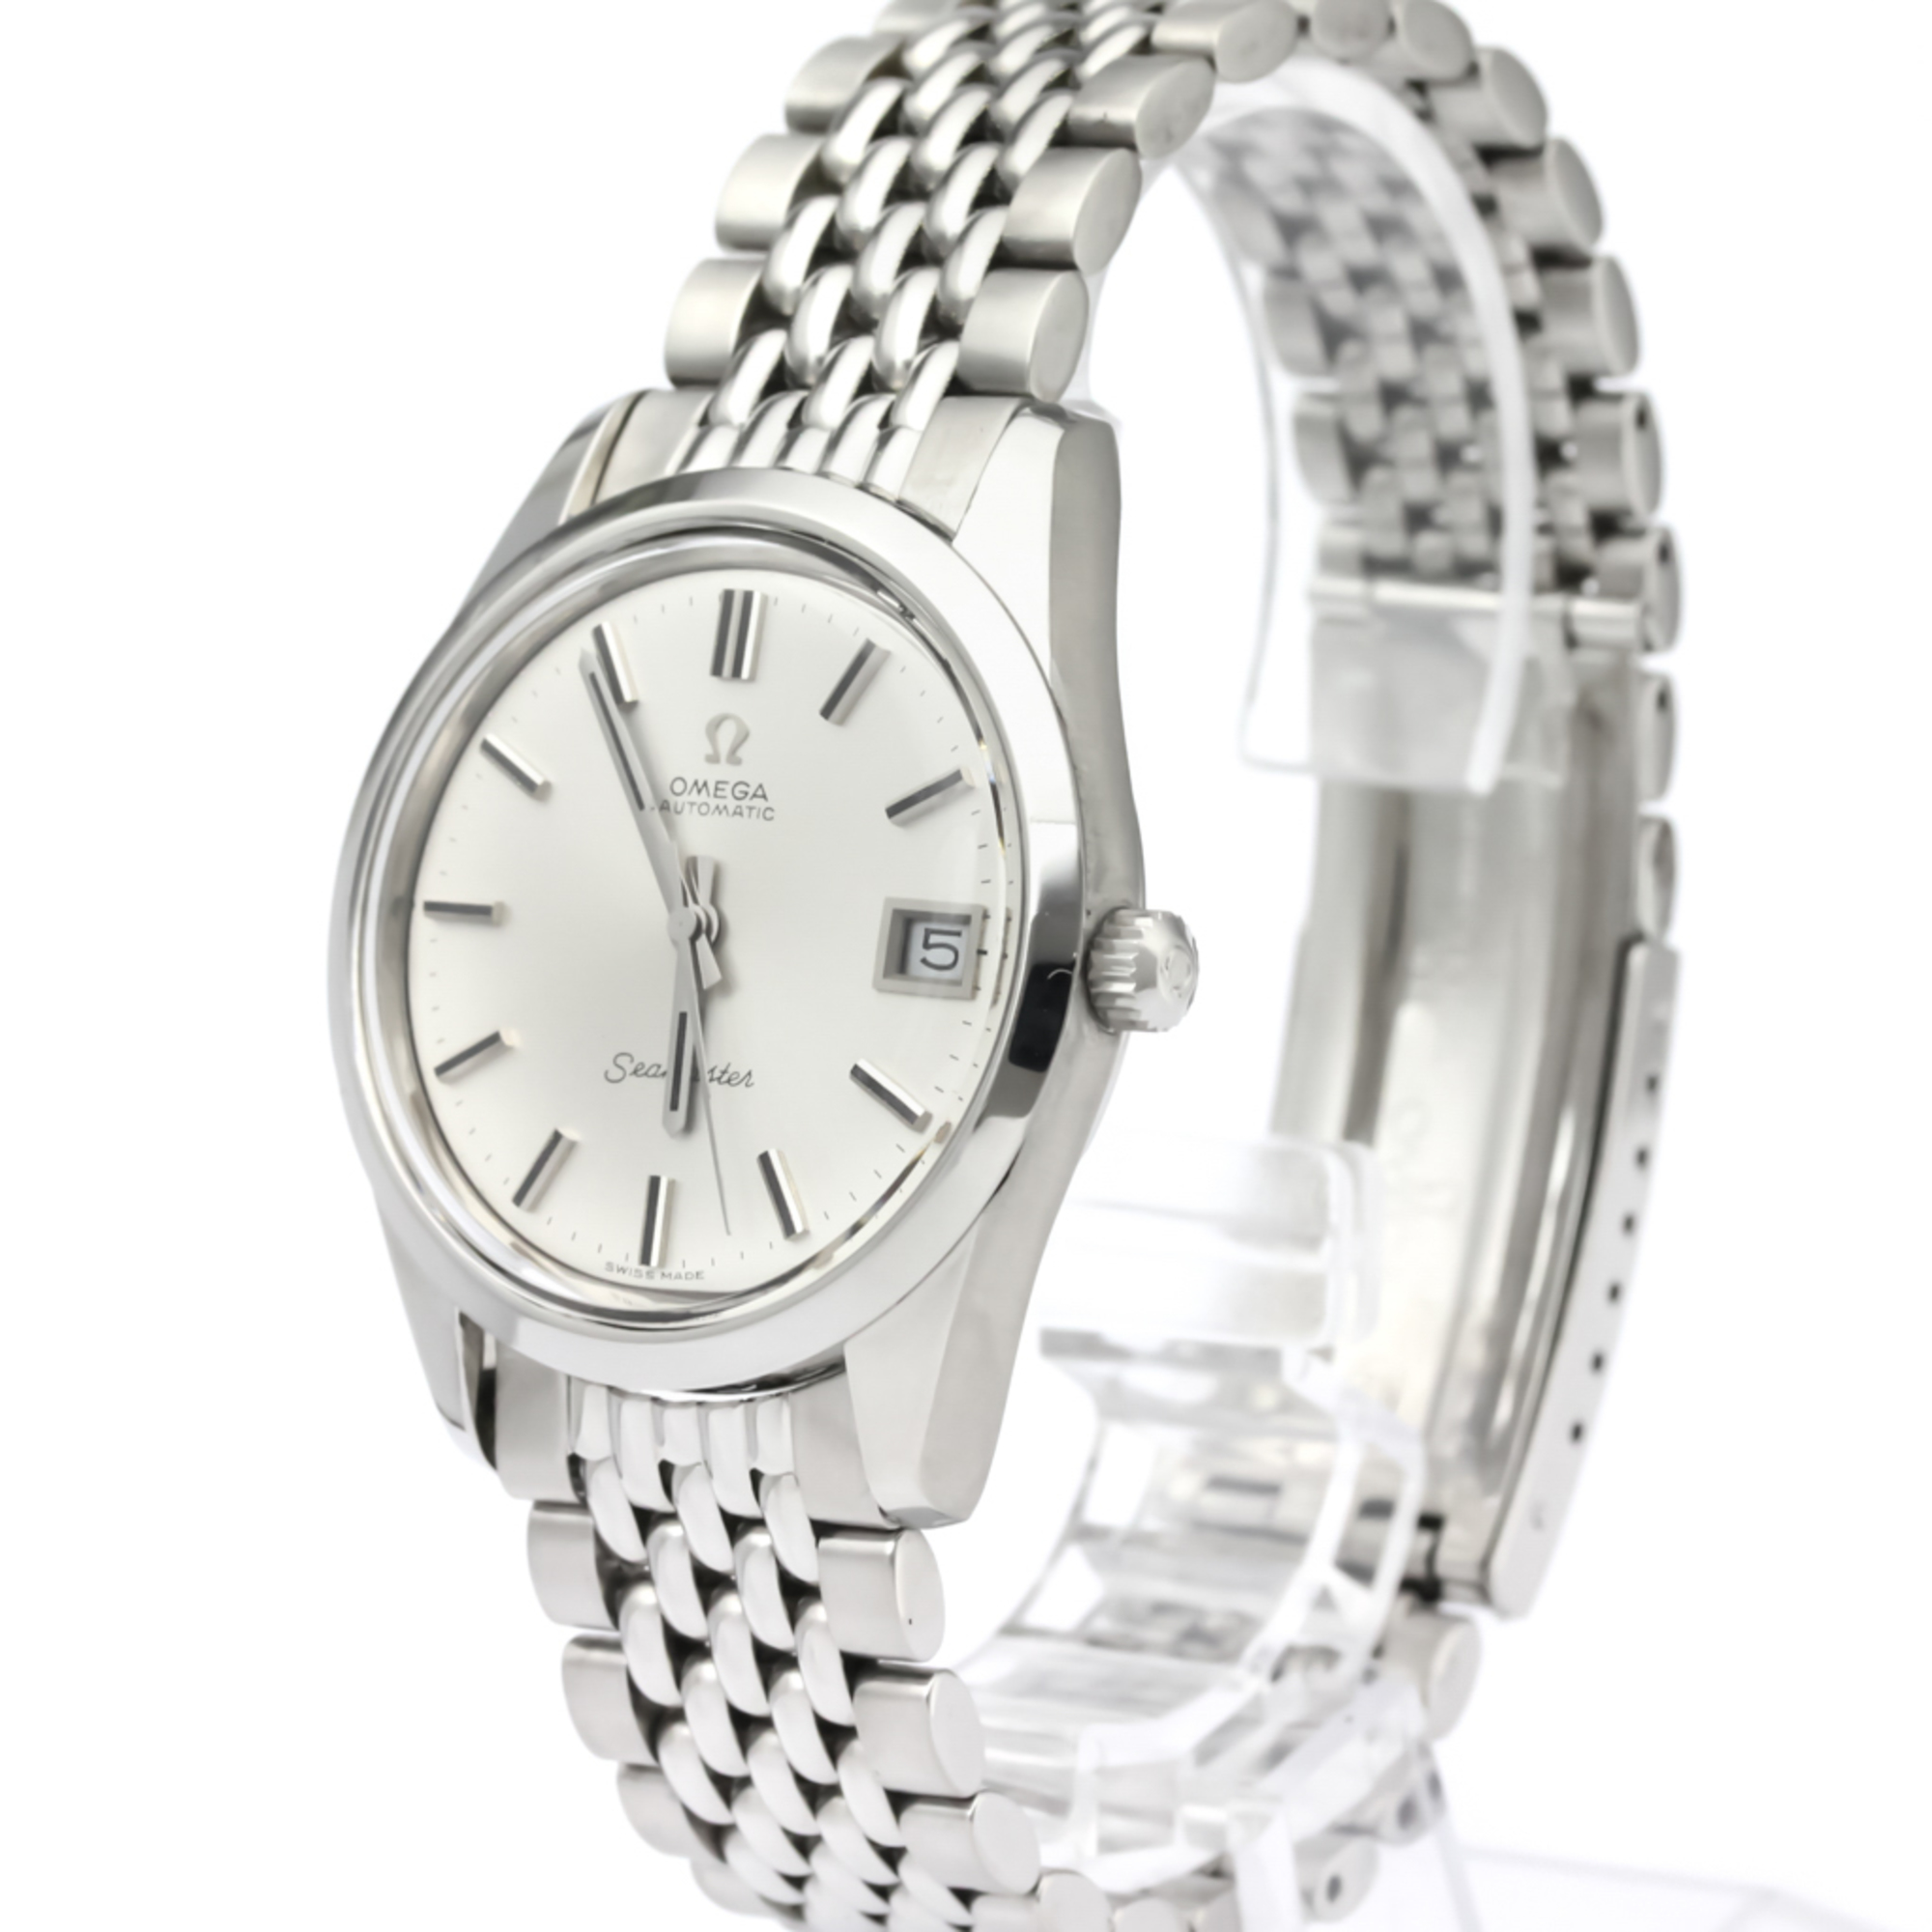 OMEGA Constellation Chronometer Steel Automatic Watch 168.0065